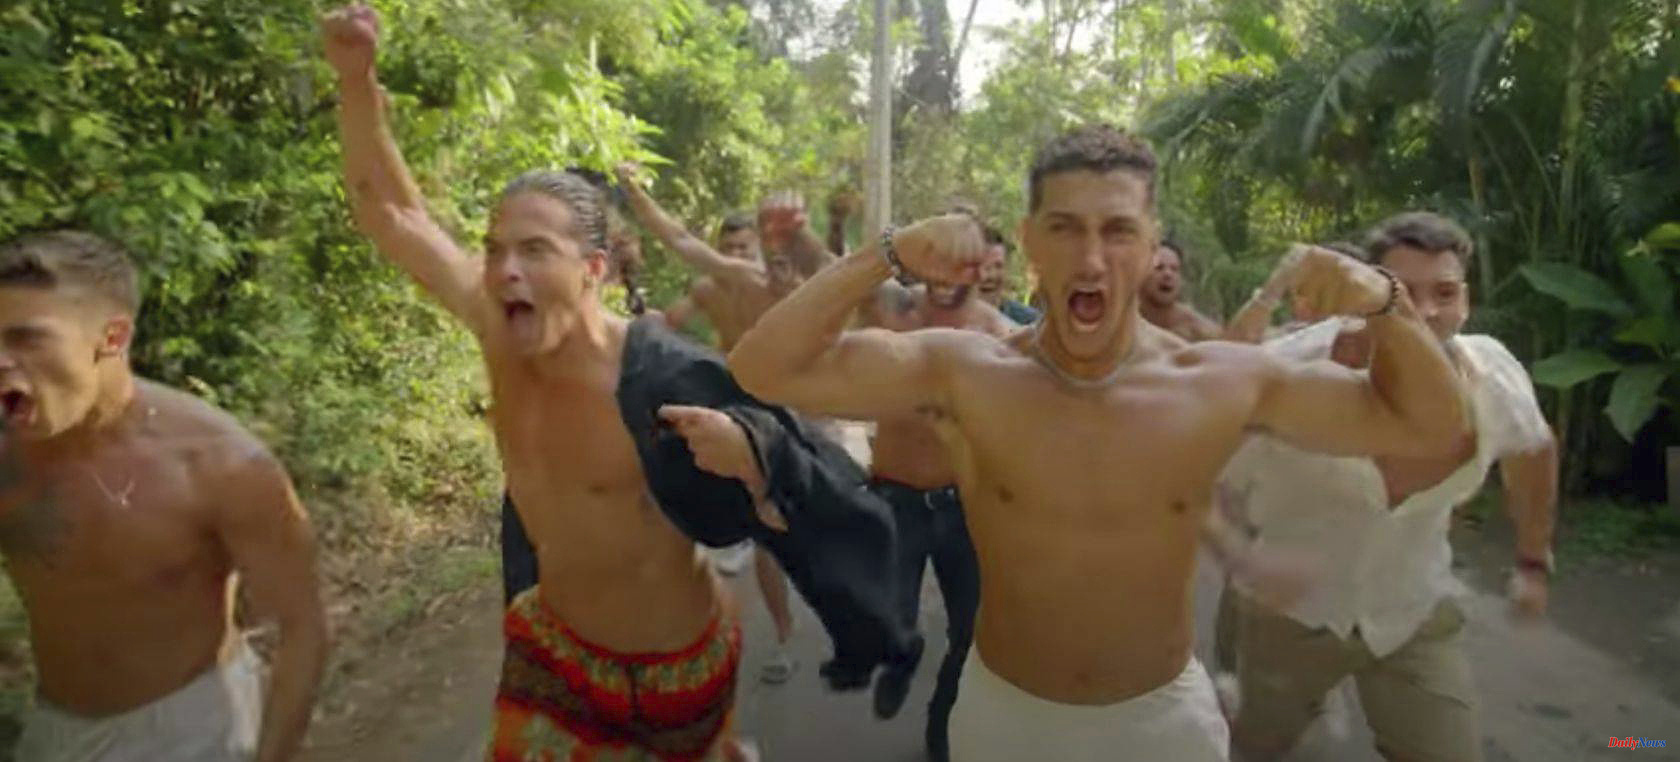 HBO MAX FBoy Island, the new love 'reality' that "punishes" rogue men "so that they stop being primates"